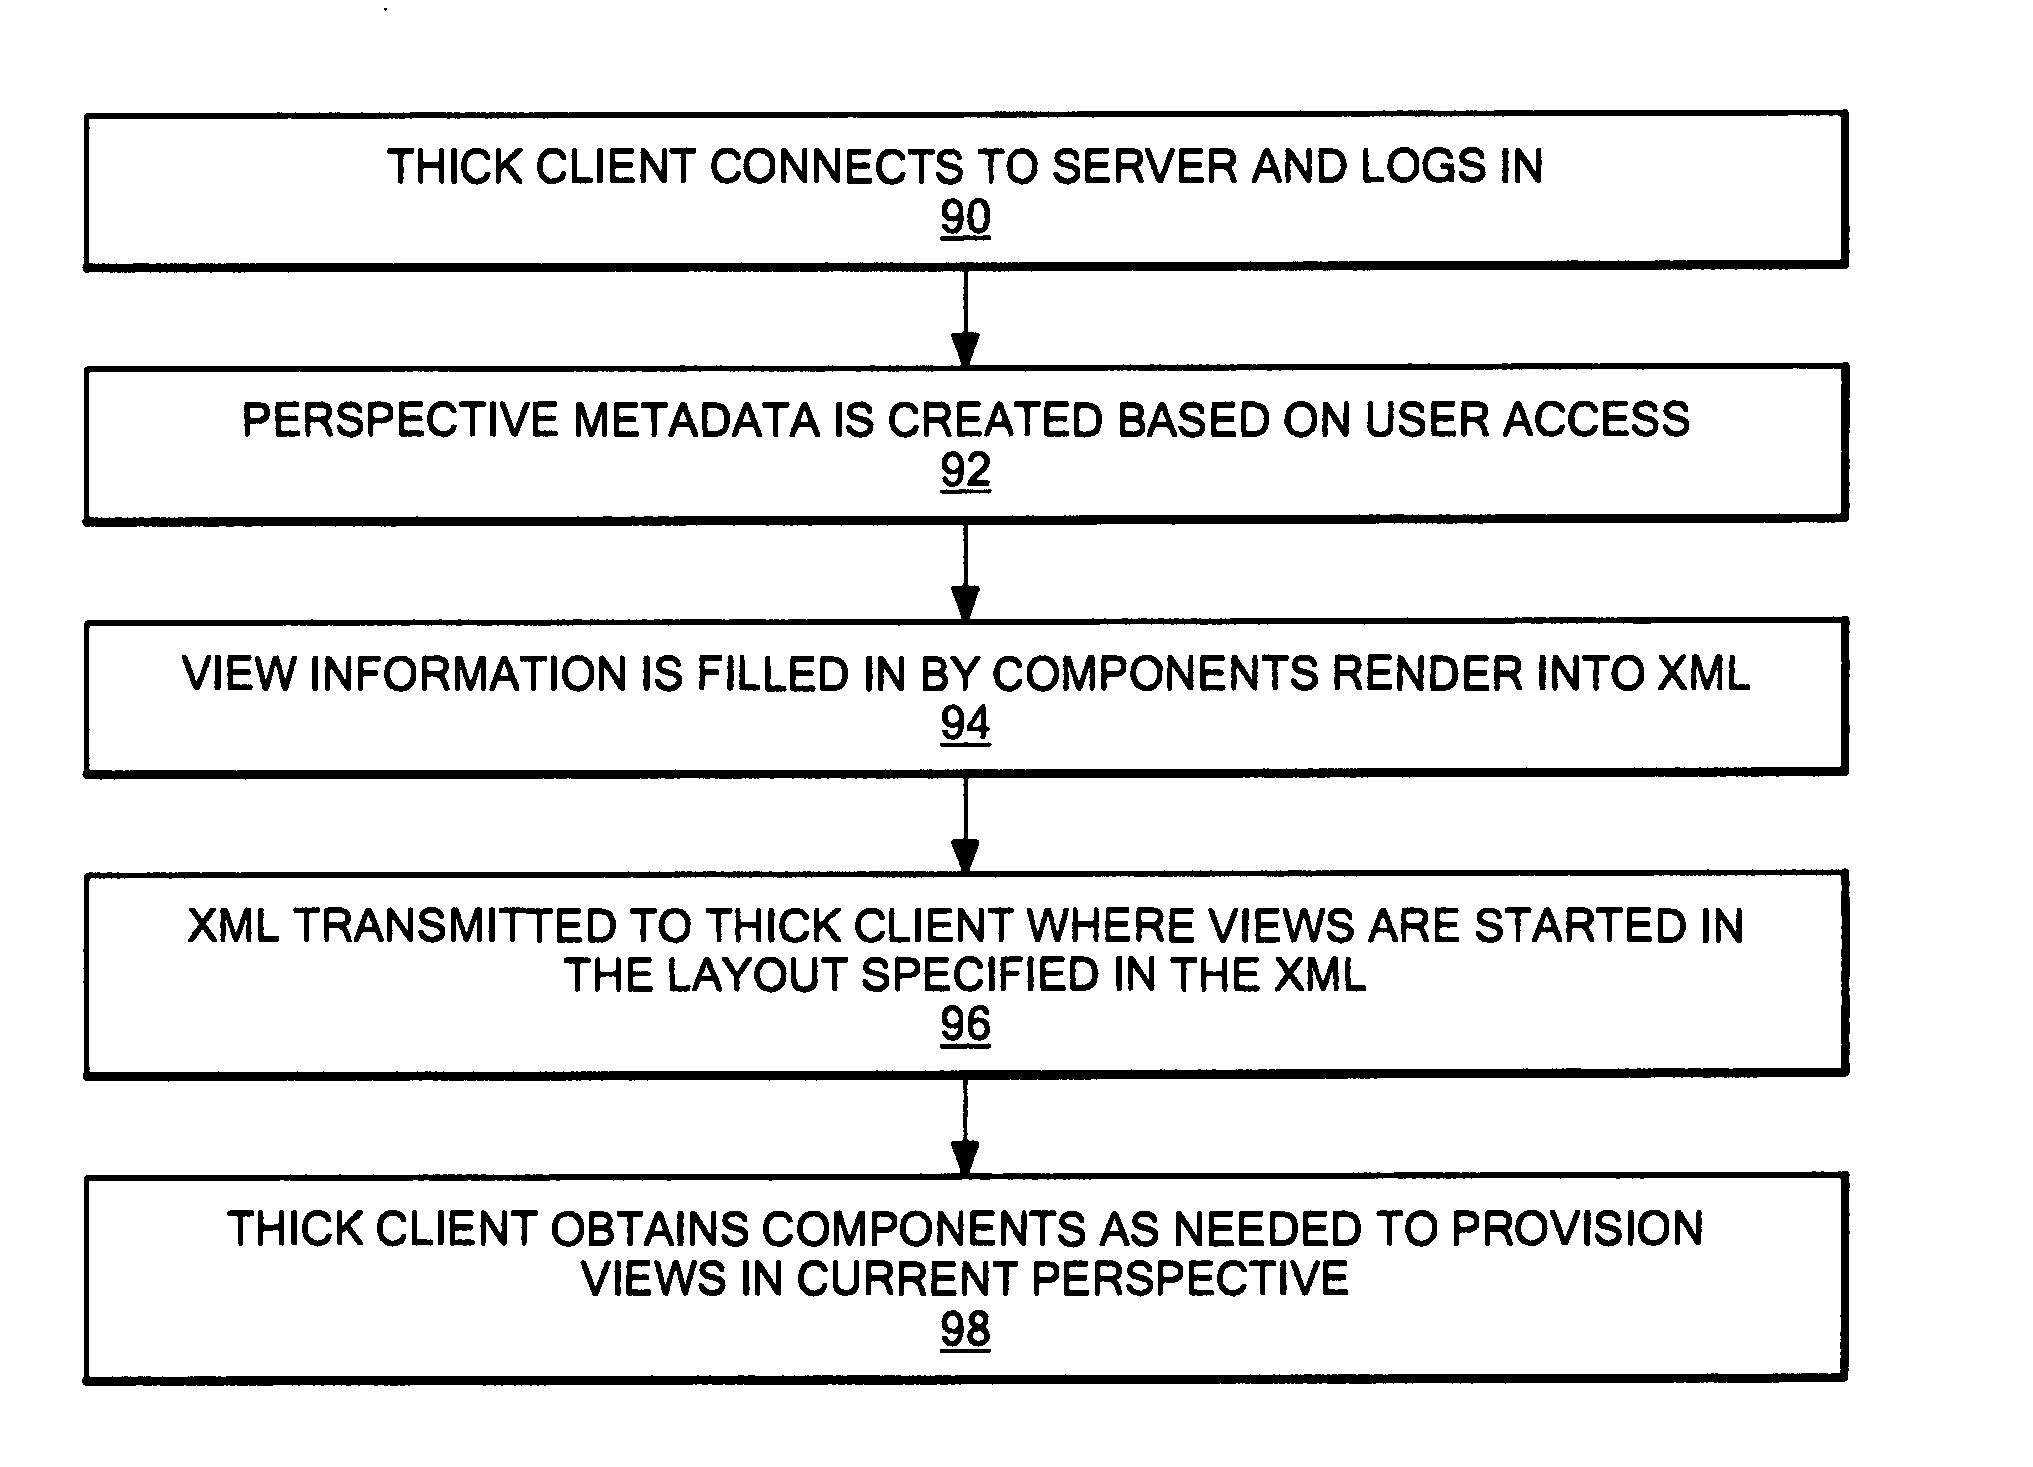 Markup method for managing rich client code and experiences using multi-component pages